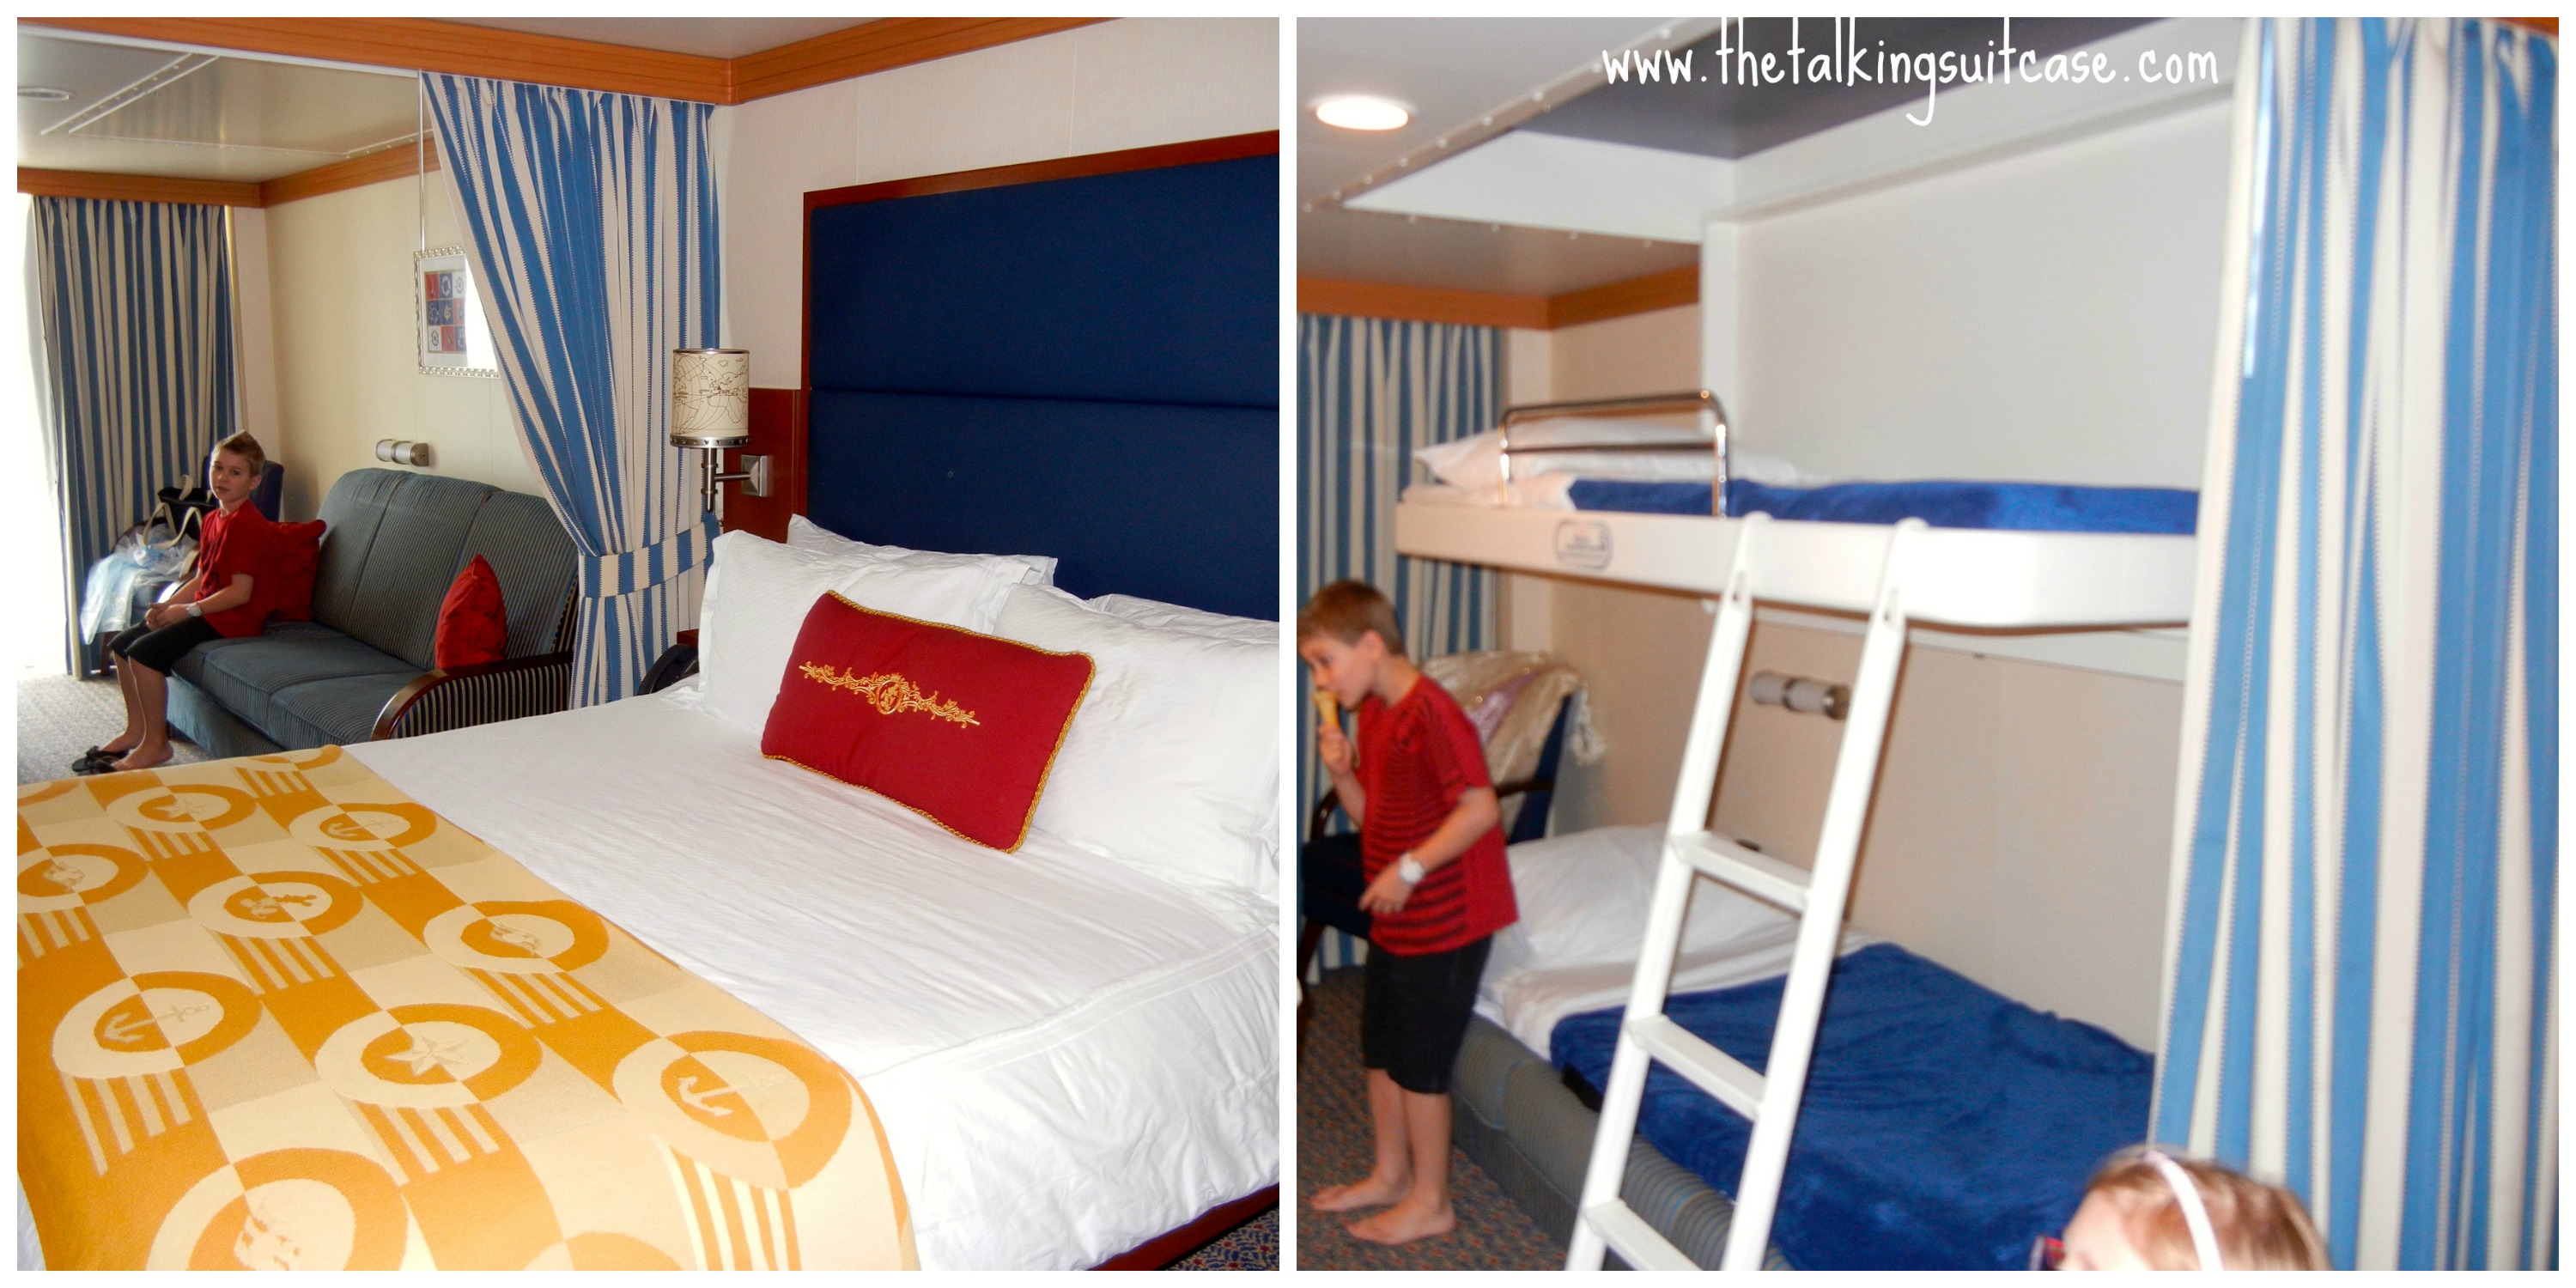 Disney Cruise Rooms I Stateroom On, Cruise Ship Bunk Beds